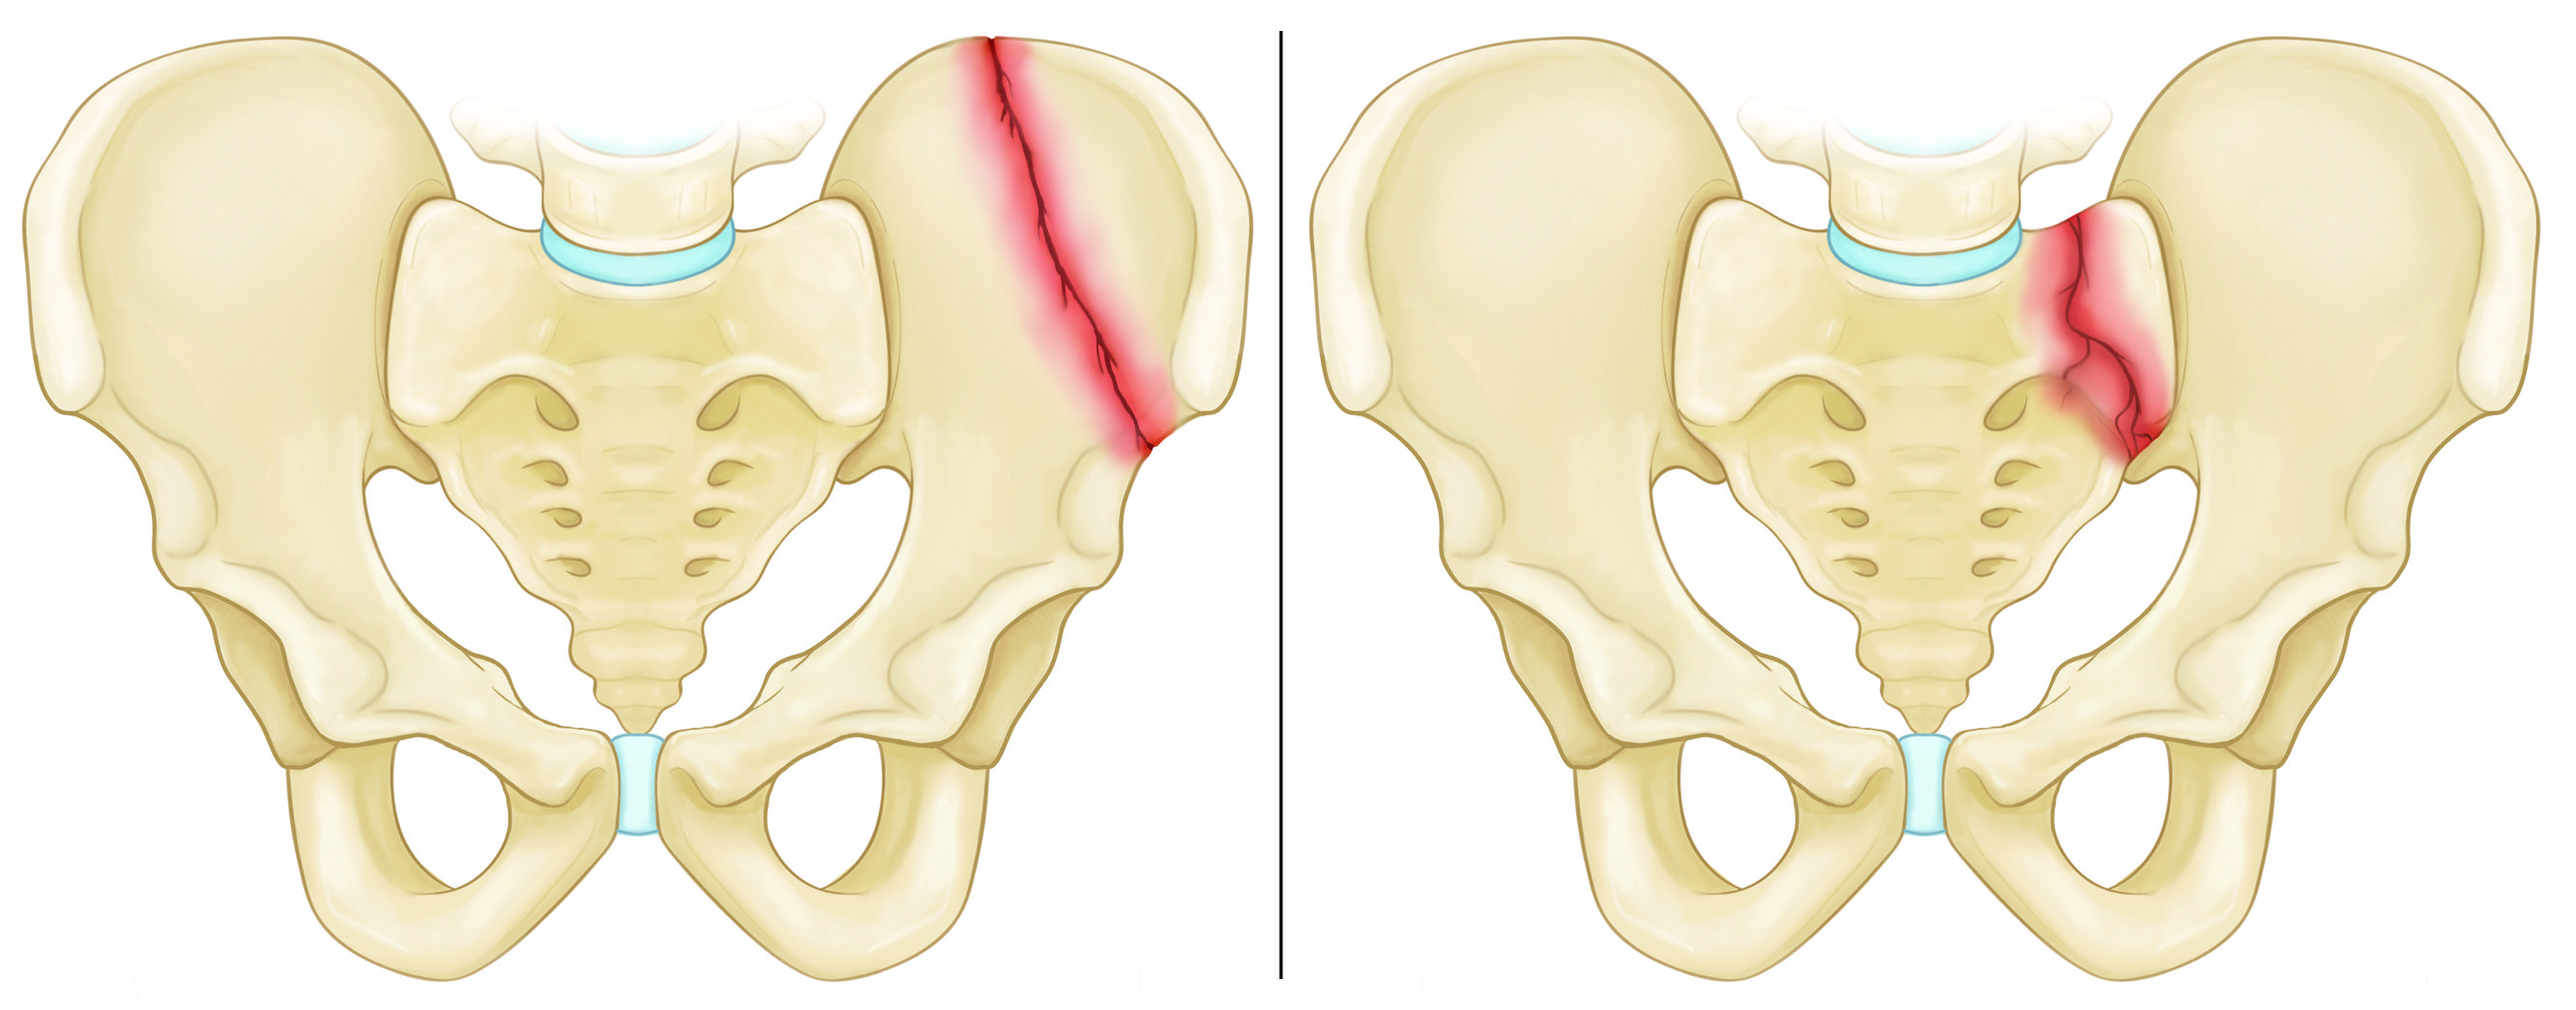 Illustrations of illiac wing and sacrum fractures